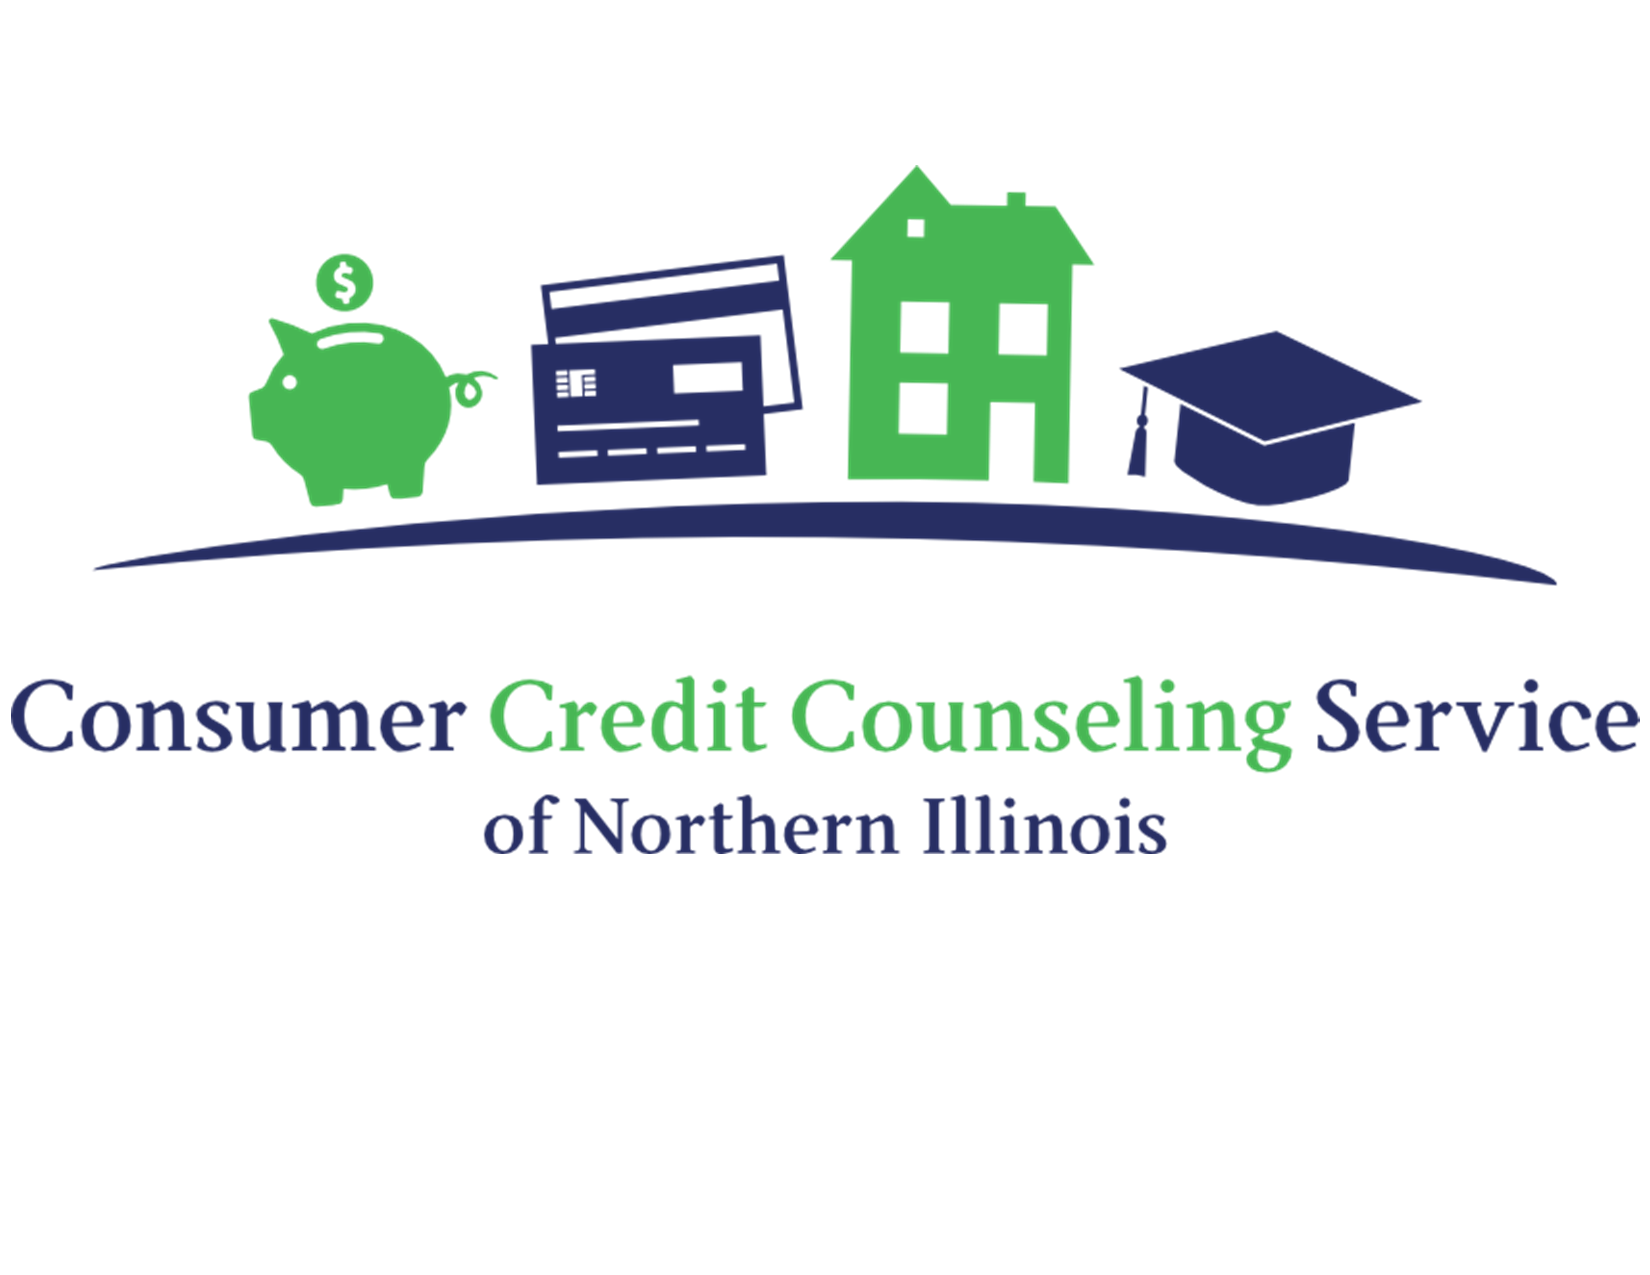 Consumer Credit Counseling of Northern Illinois